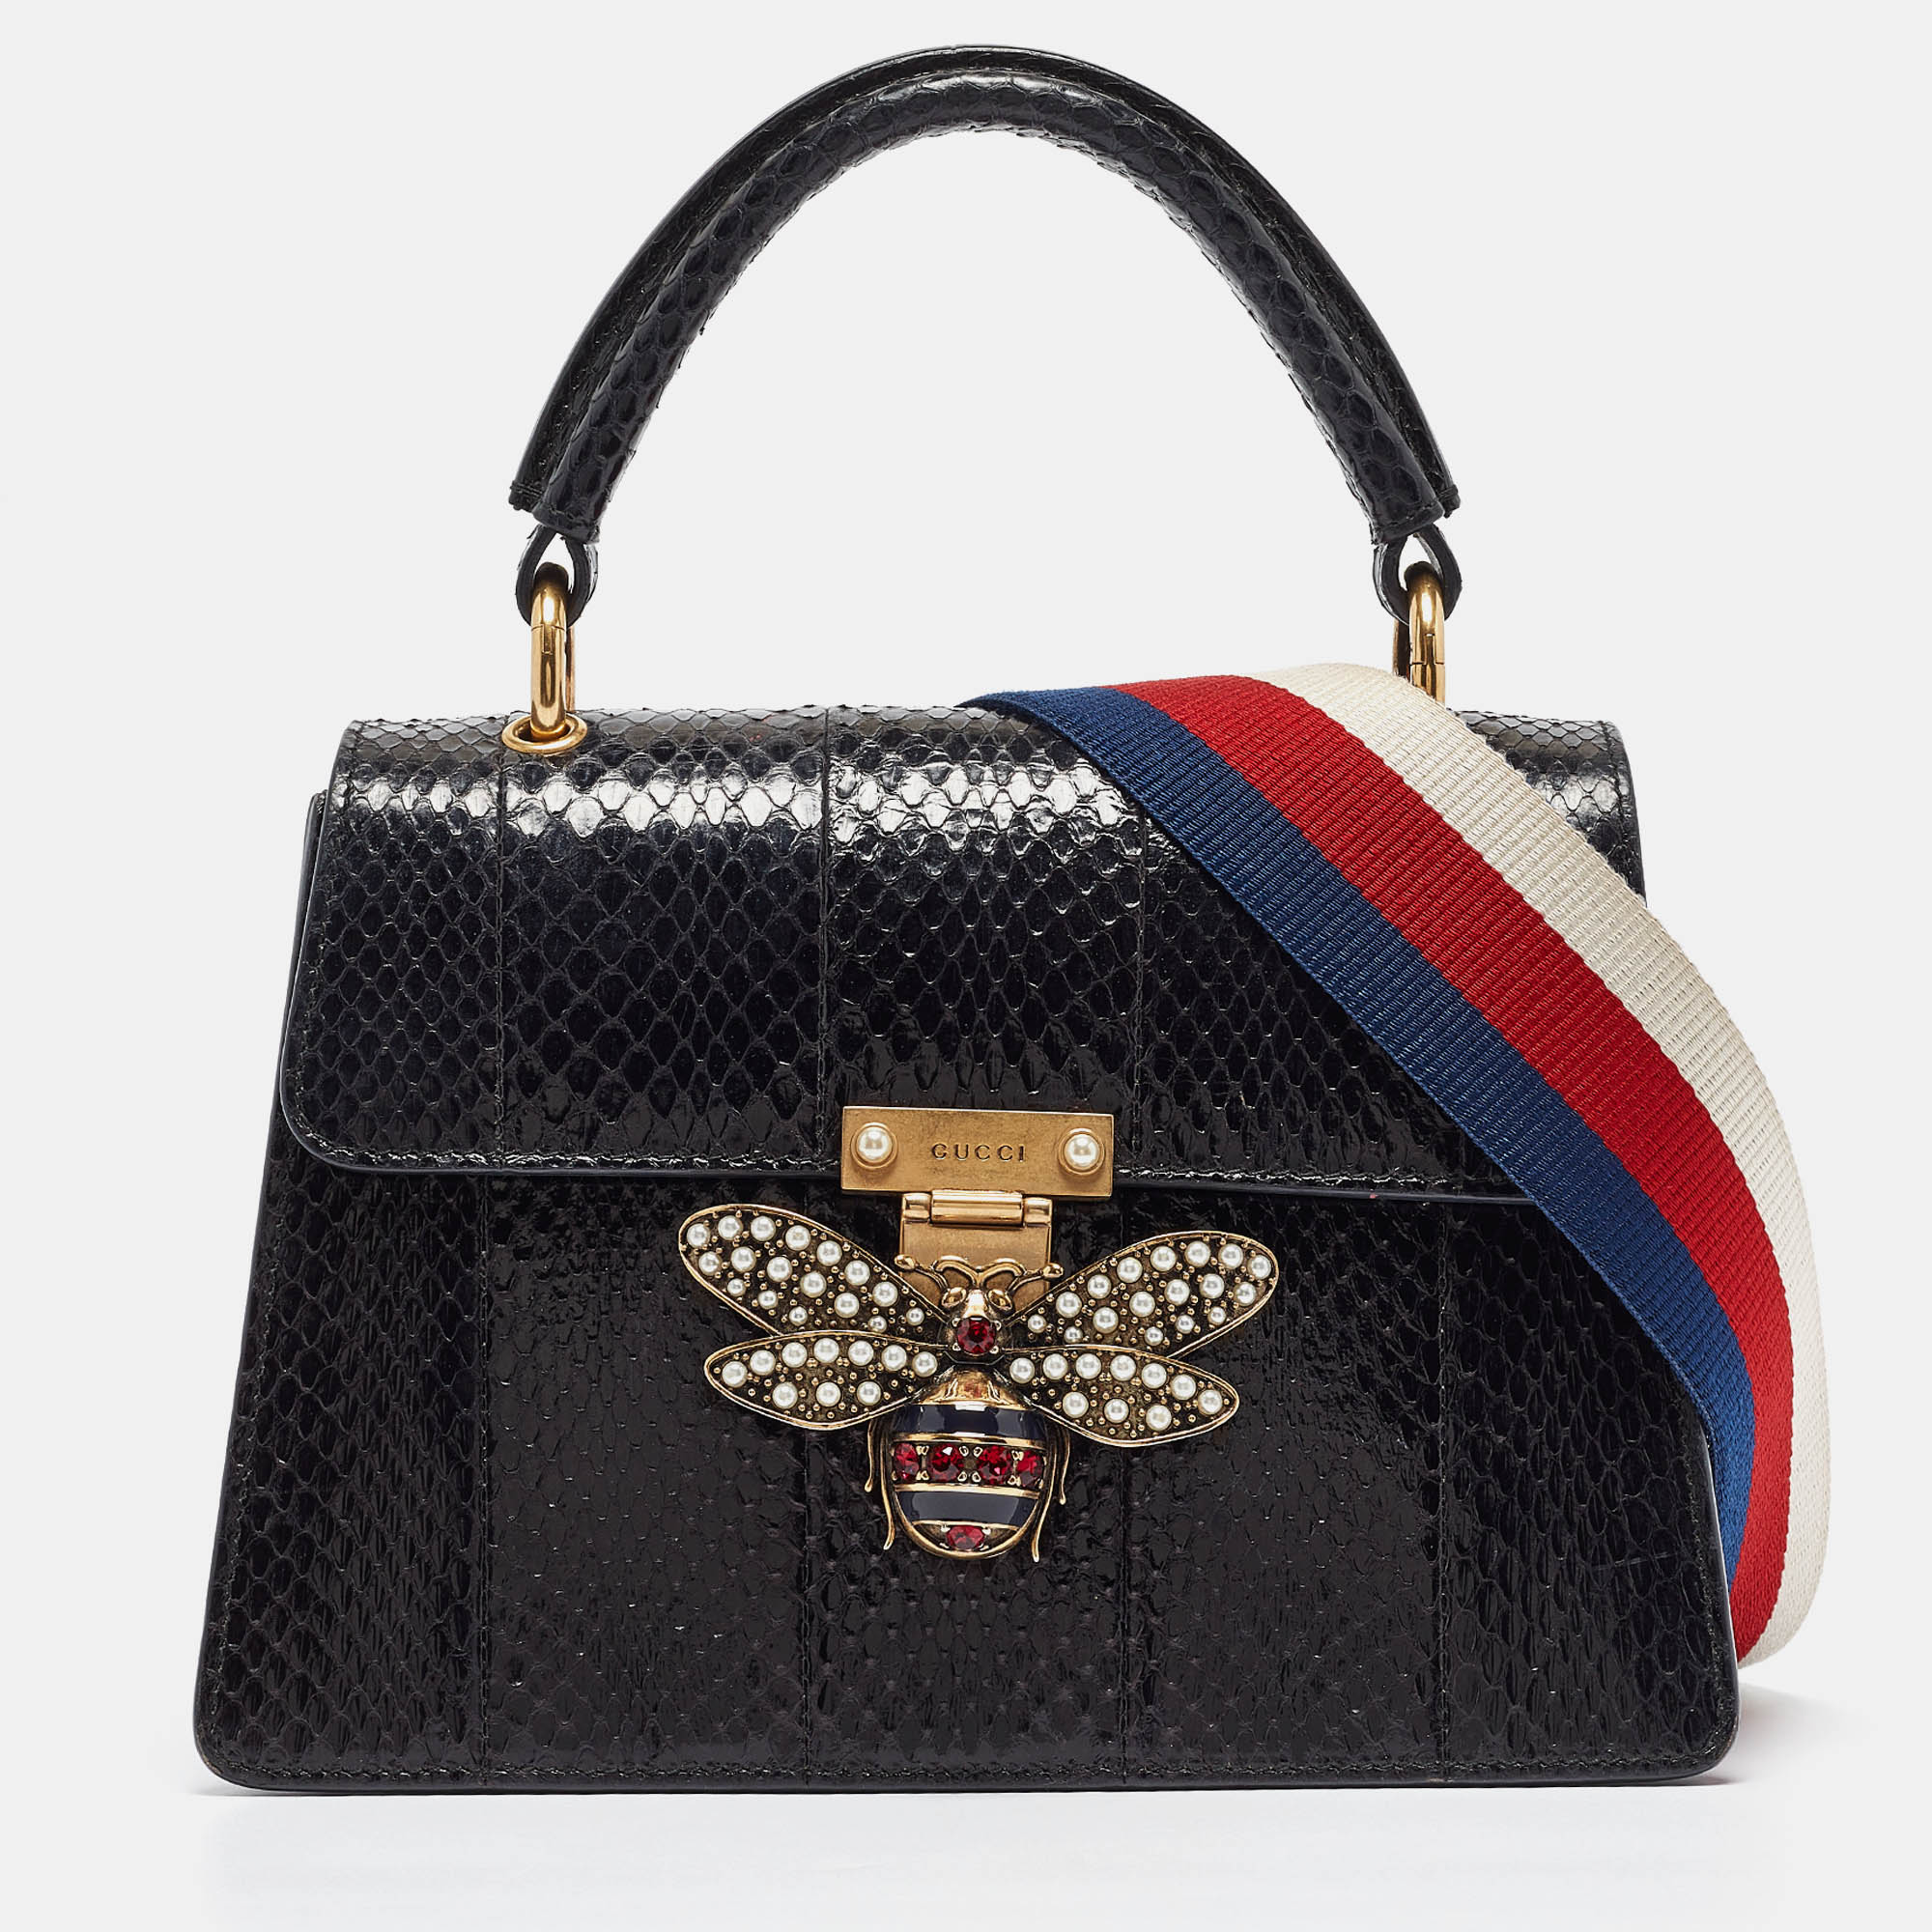 Gucci black water snake small queen margaret top handle bag